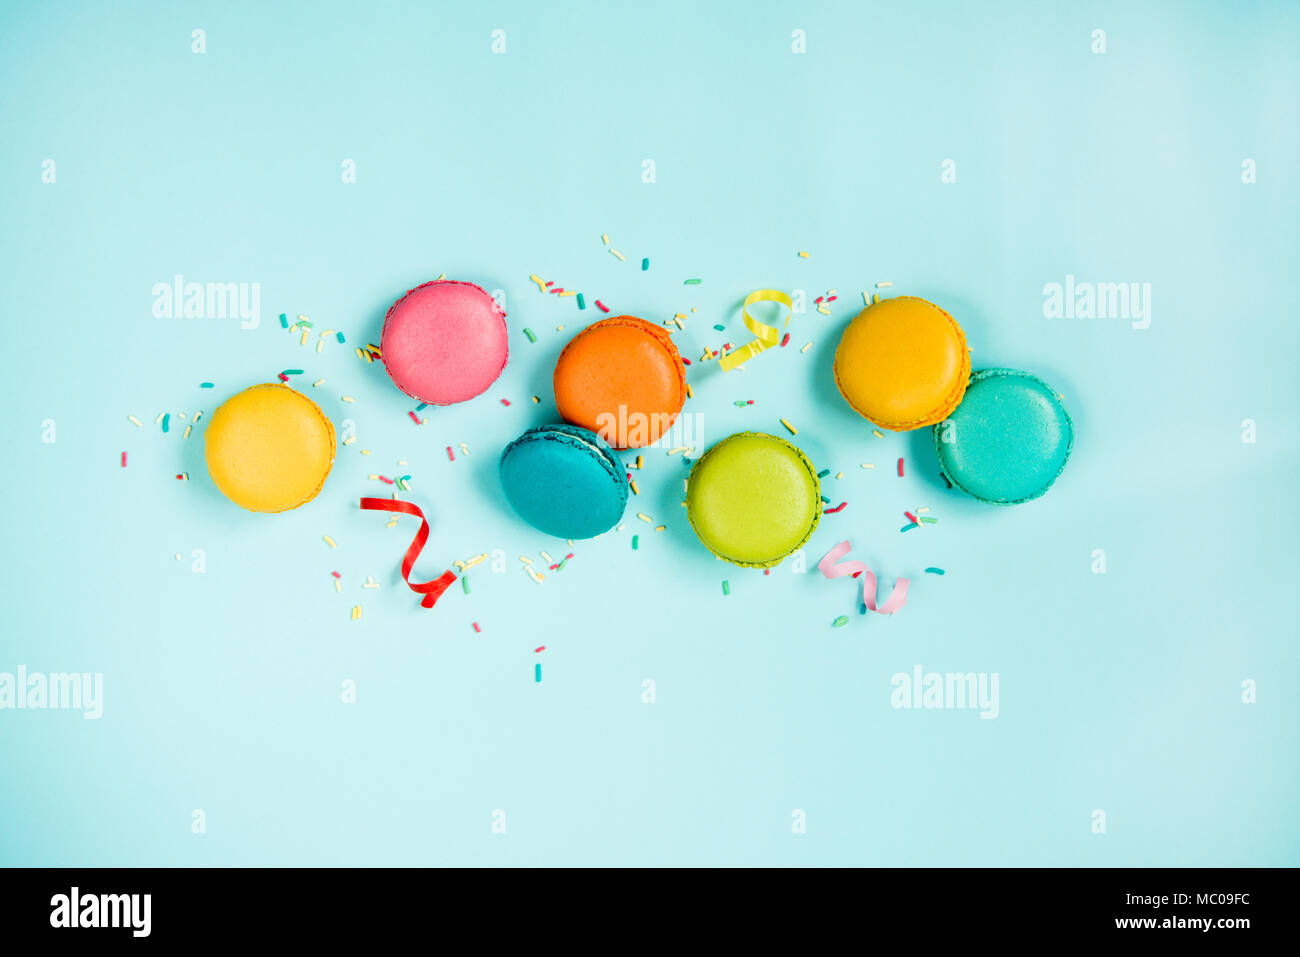 Top view of colorful macaroons, sugar sprinkles and party ribbons arranged over blue background. Stock Photo